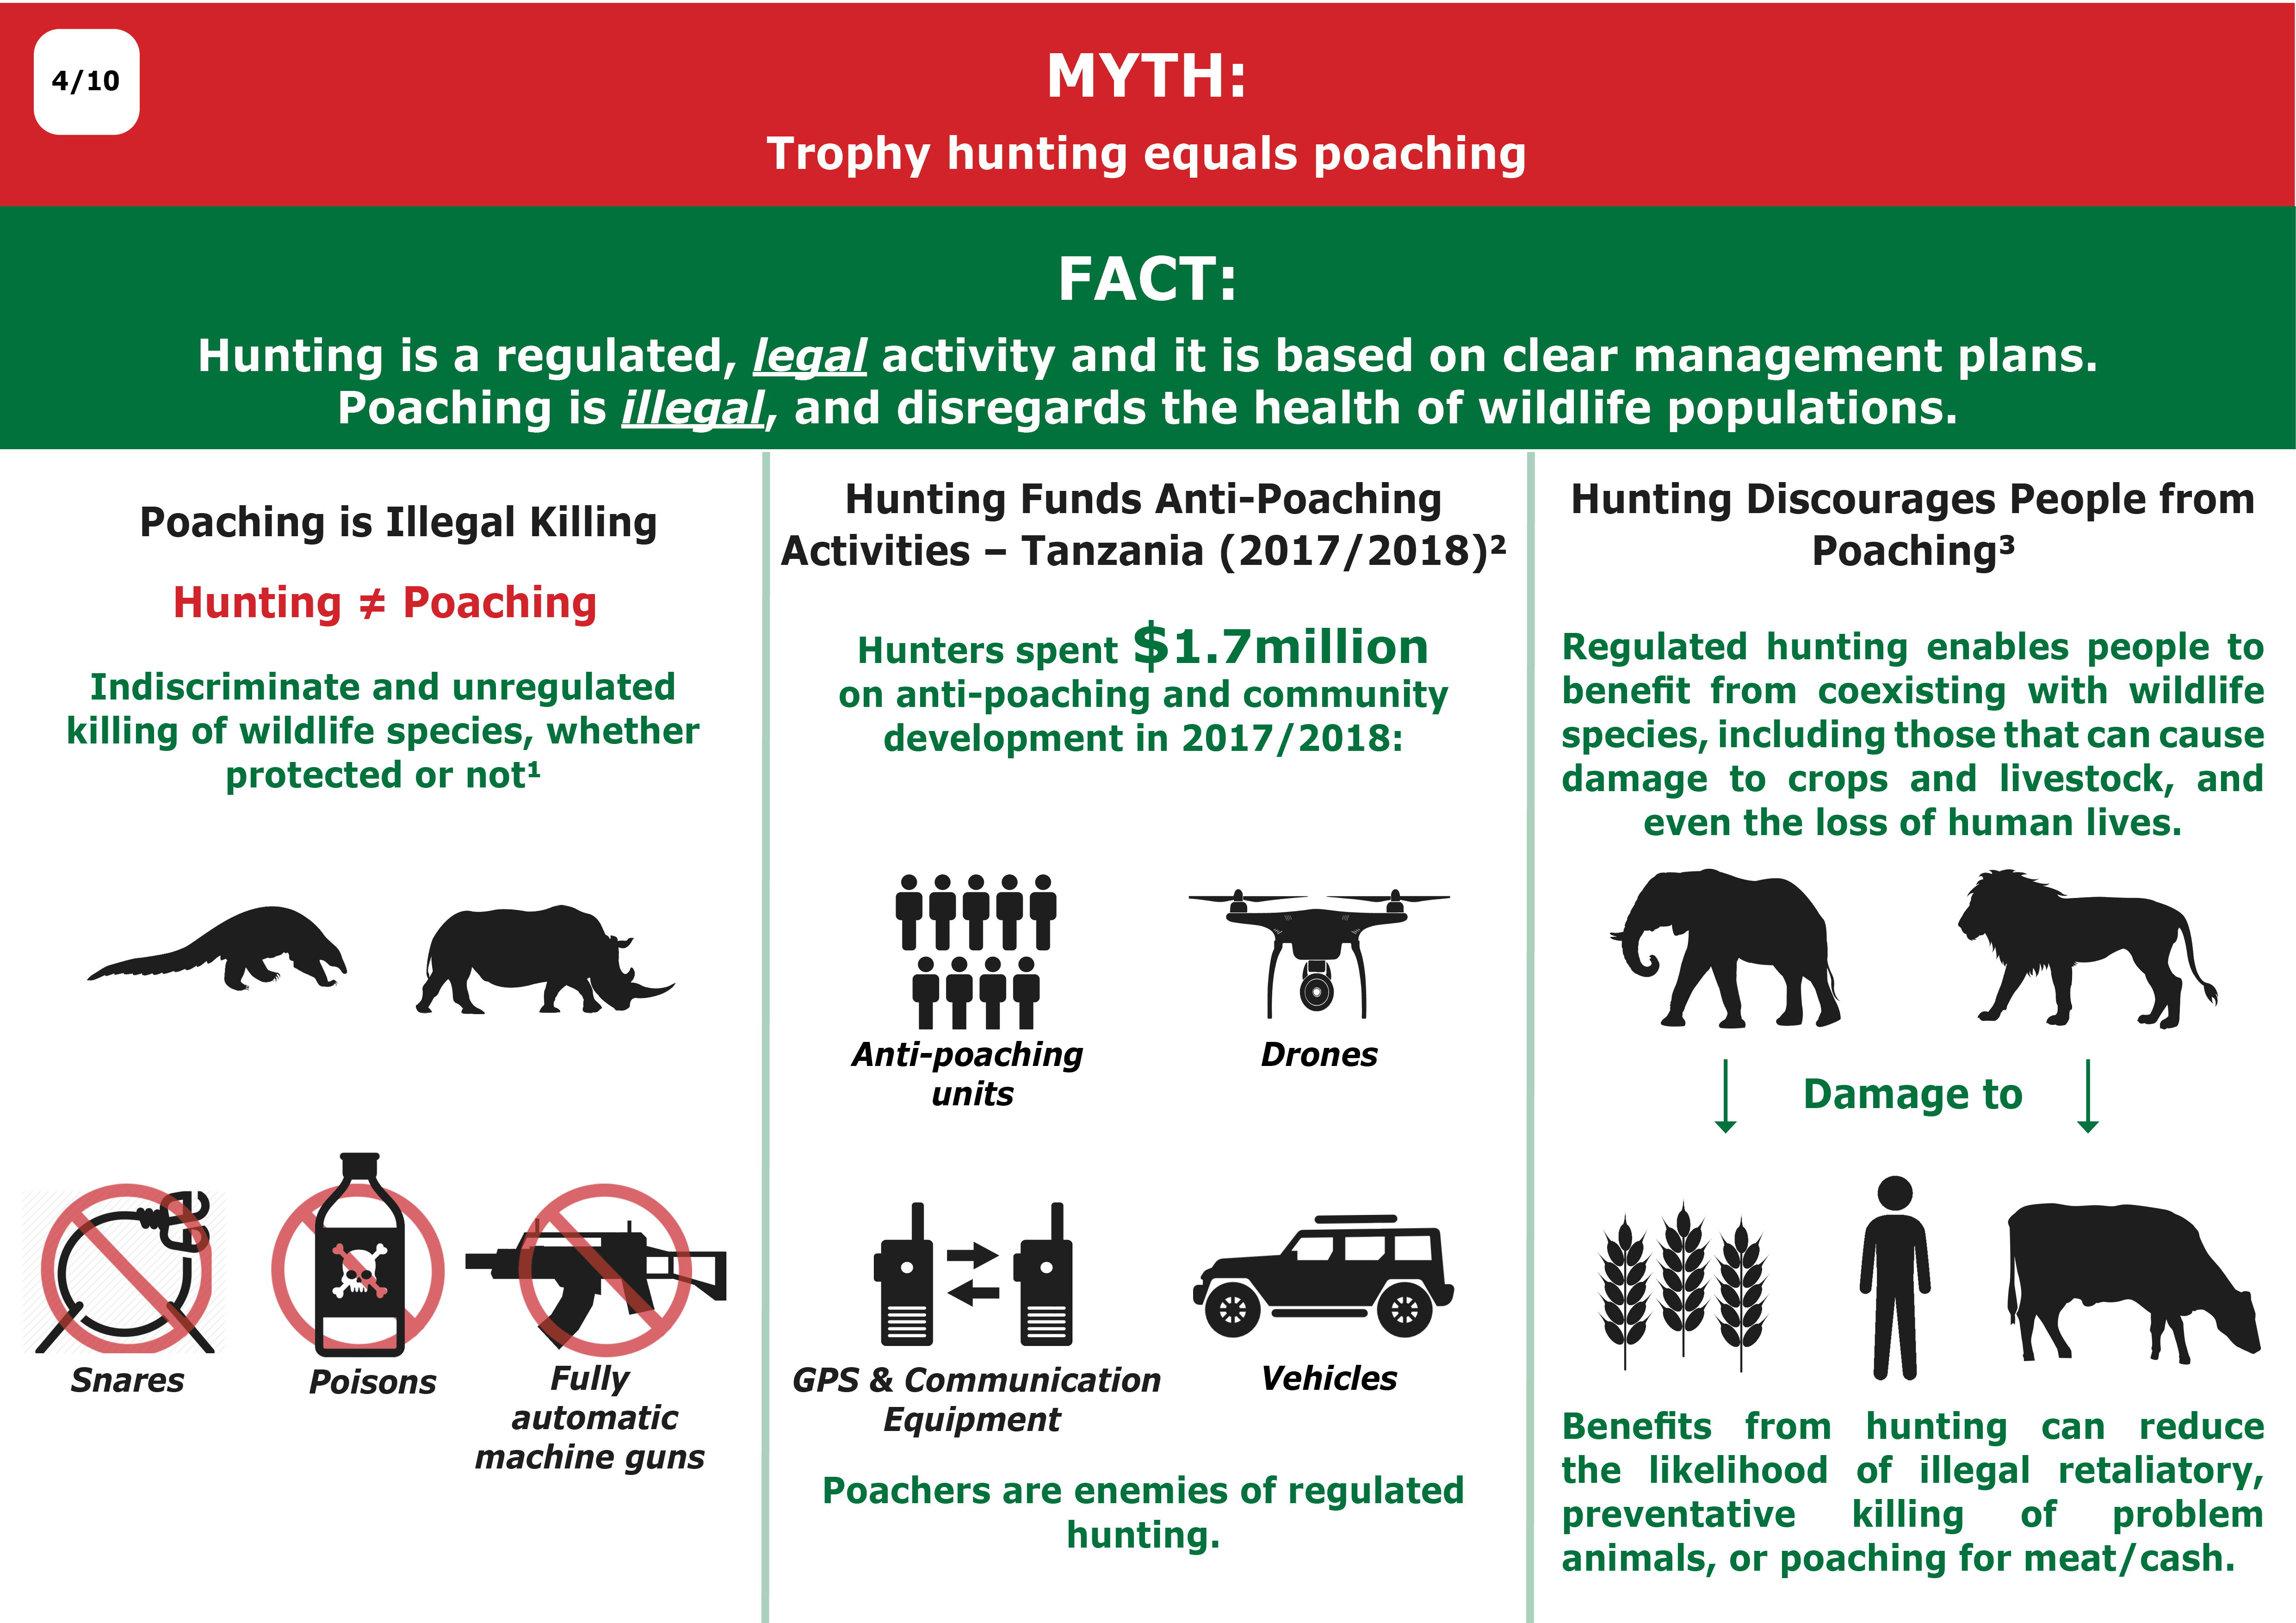 Debunking the Myths: 